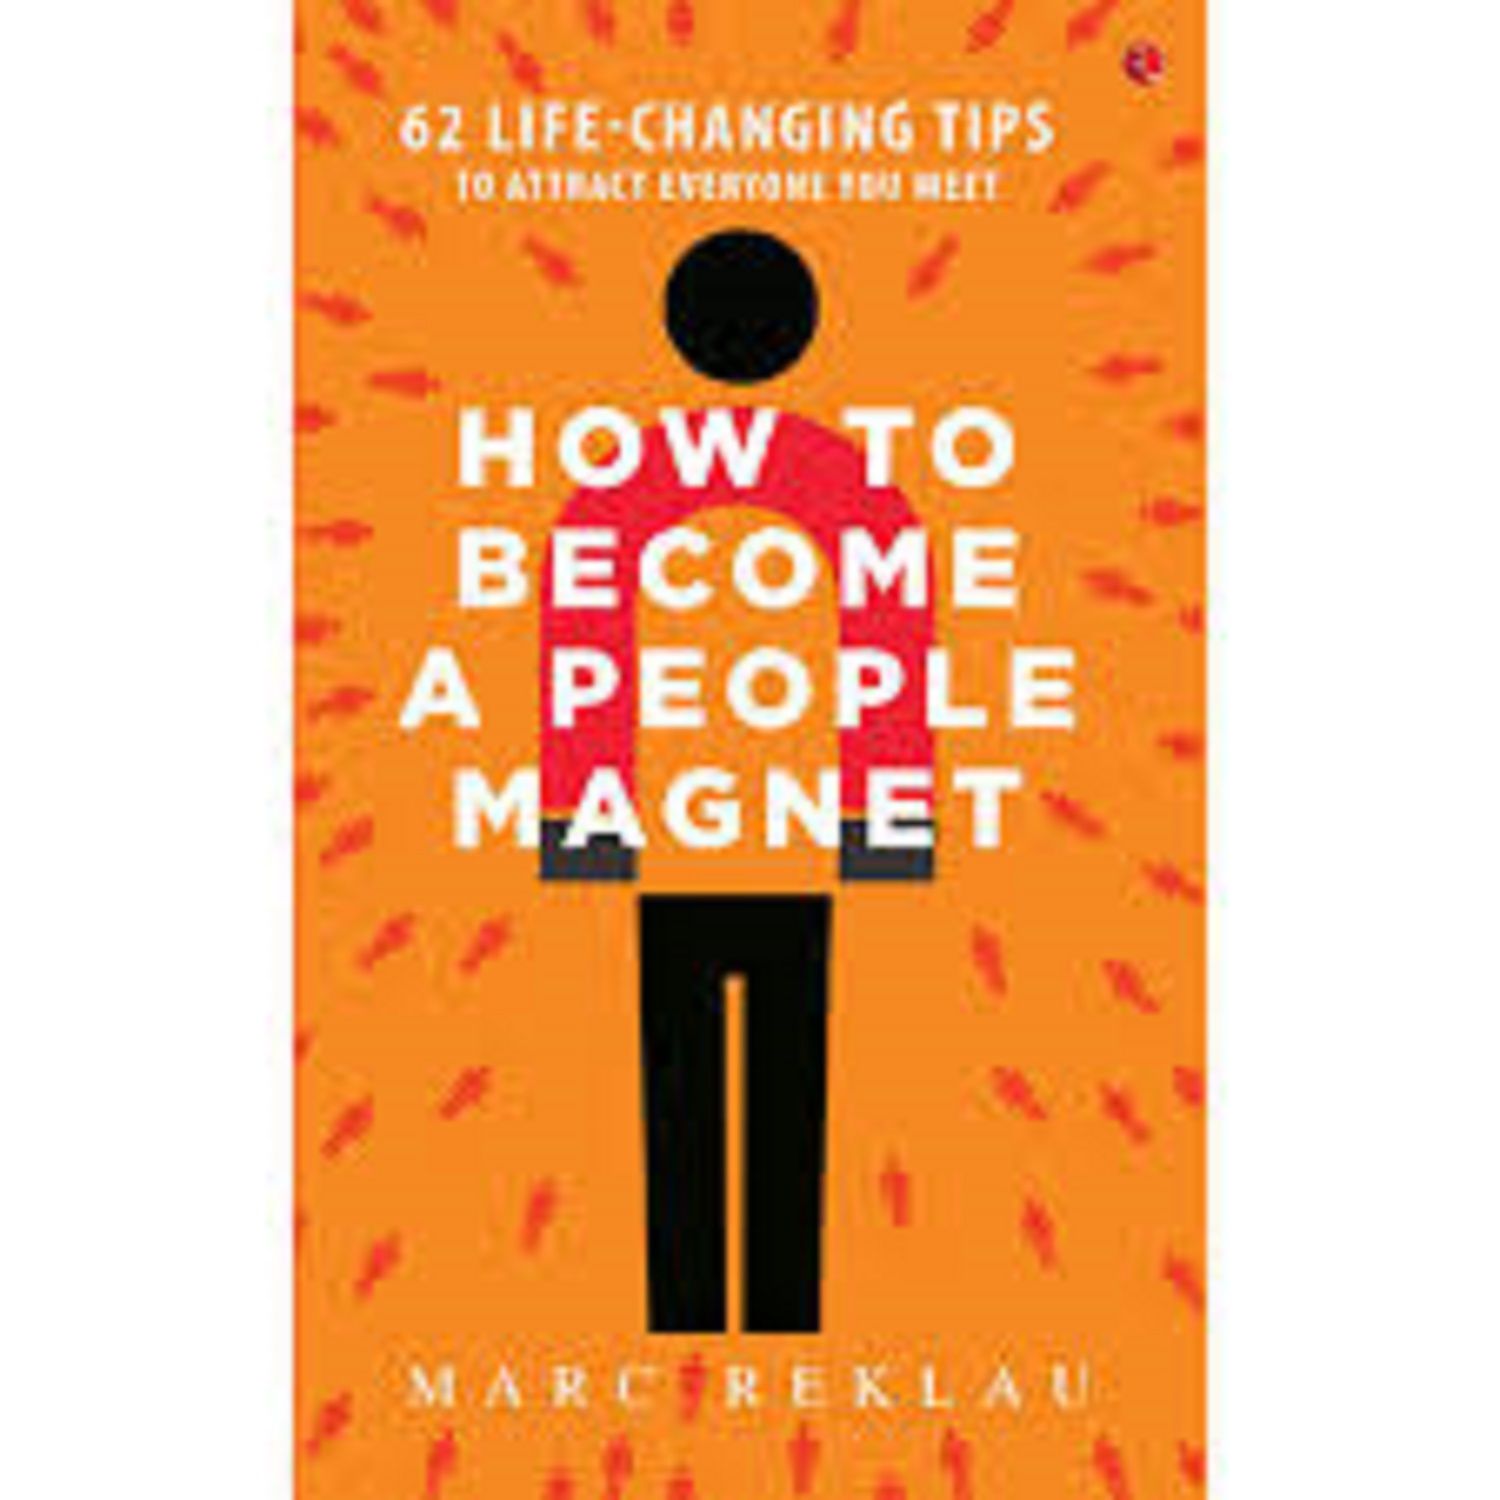     			How to Become a People Magnet - 62 Life-Changing Tips to Attract Everyone You Meet  (English, Paperback, Reklau Marc)